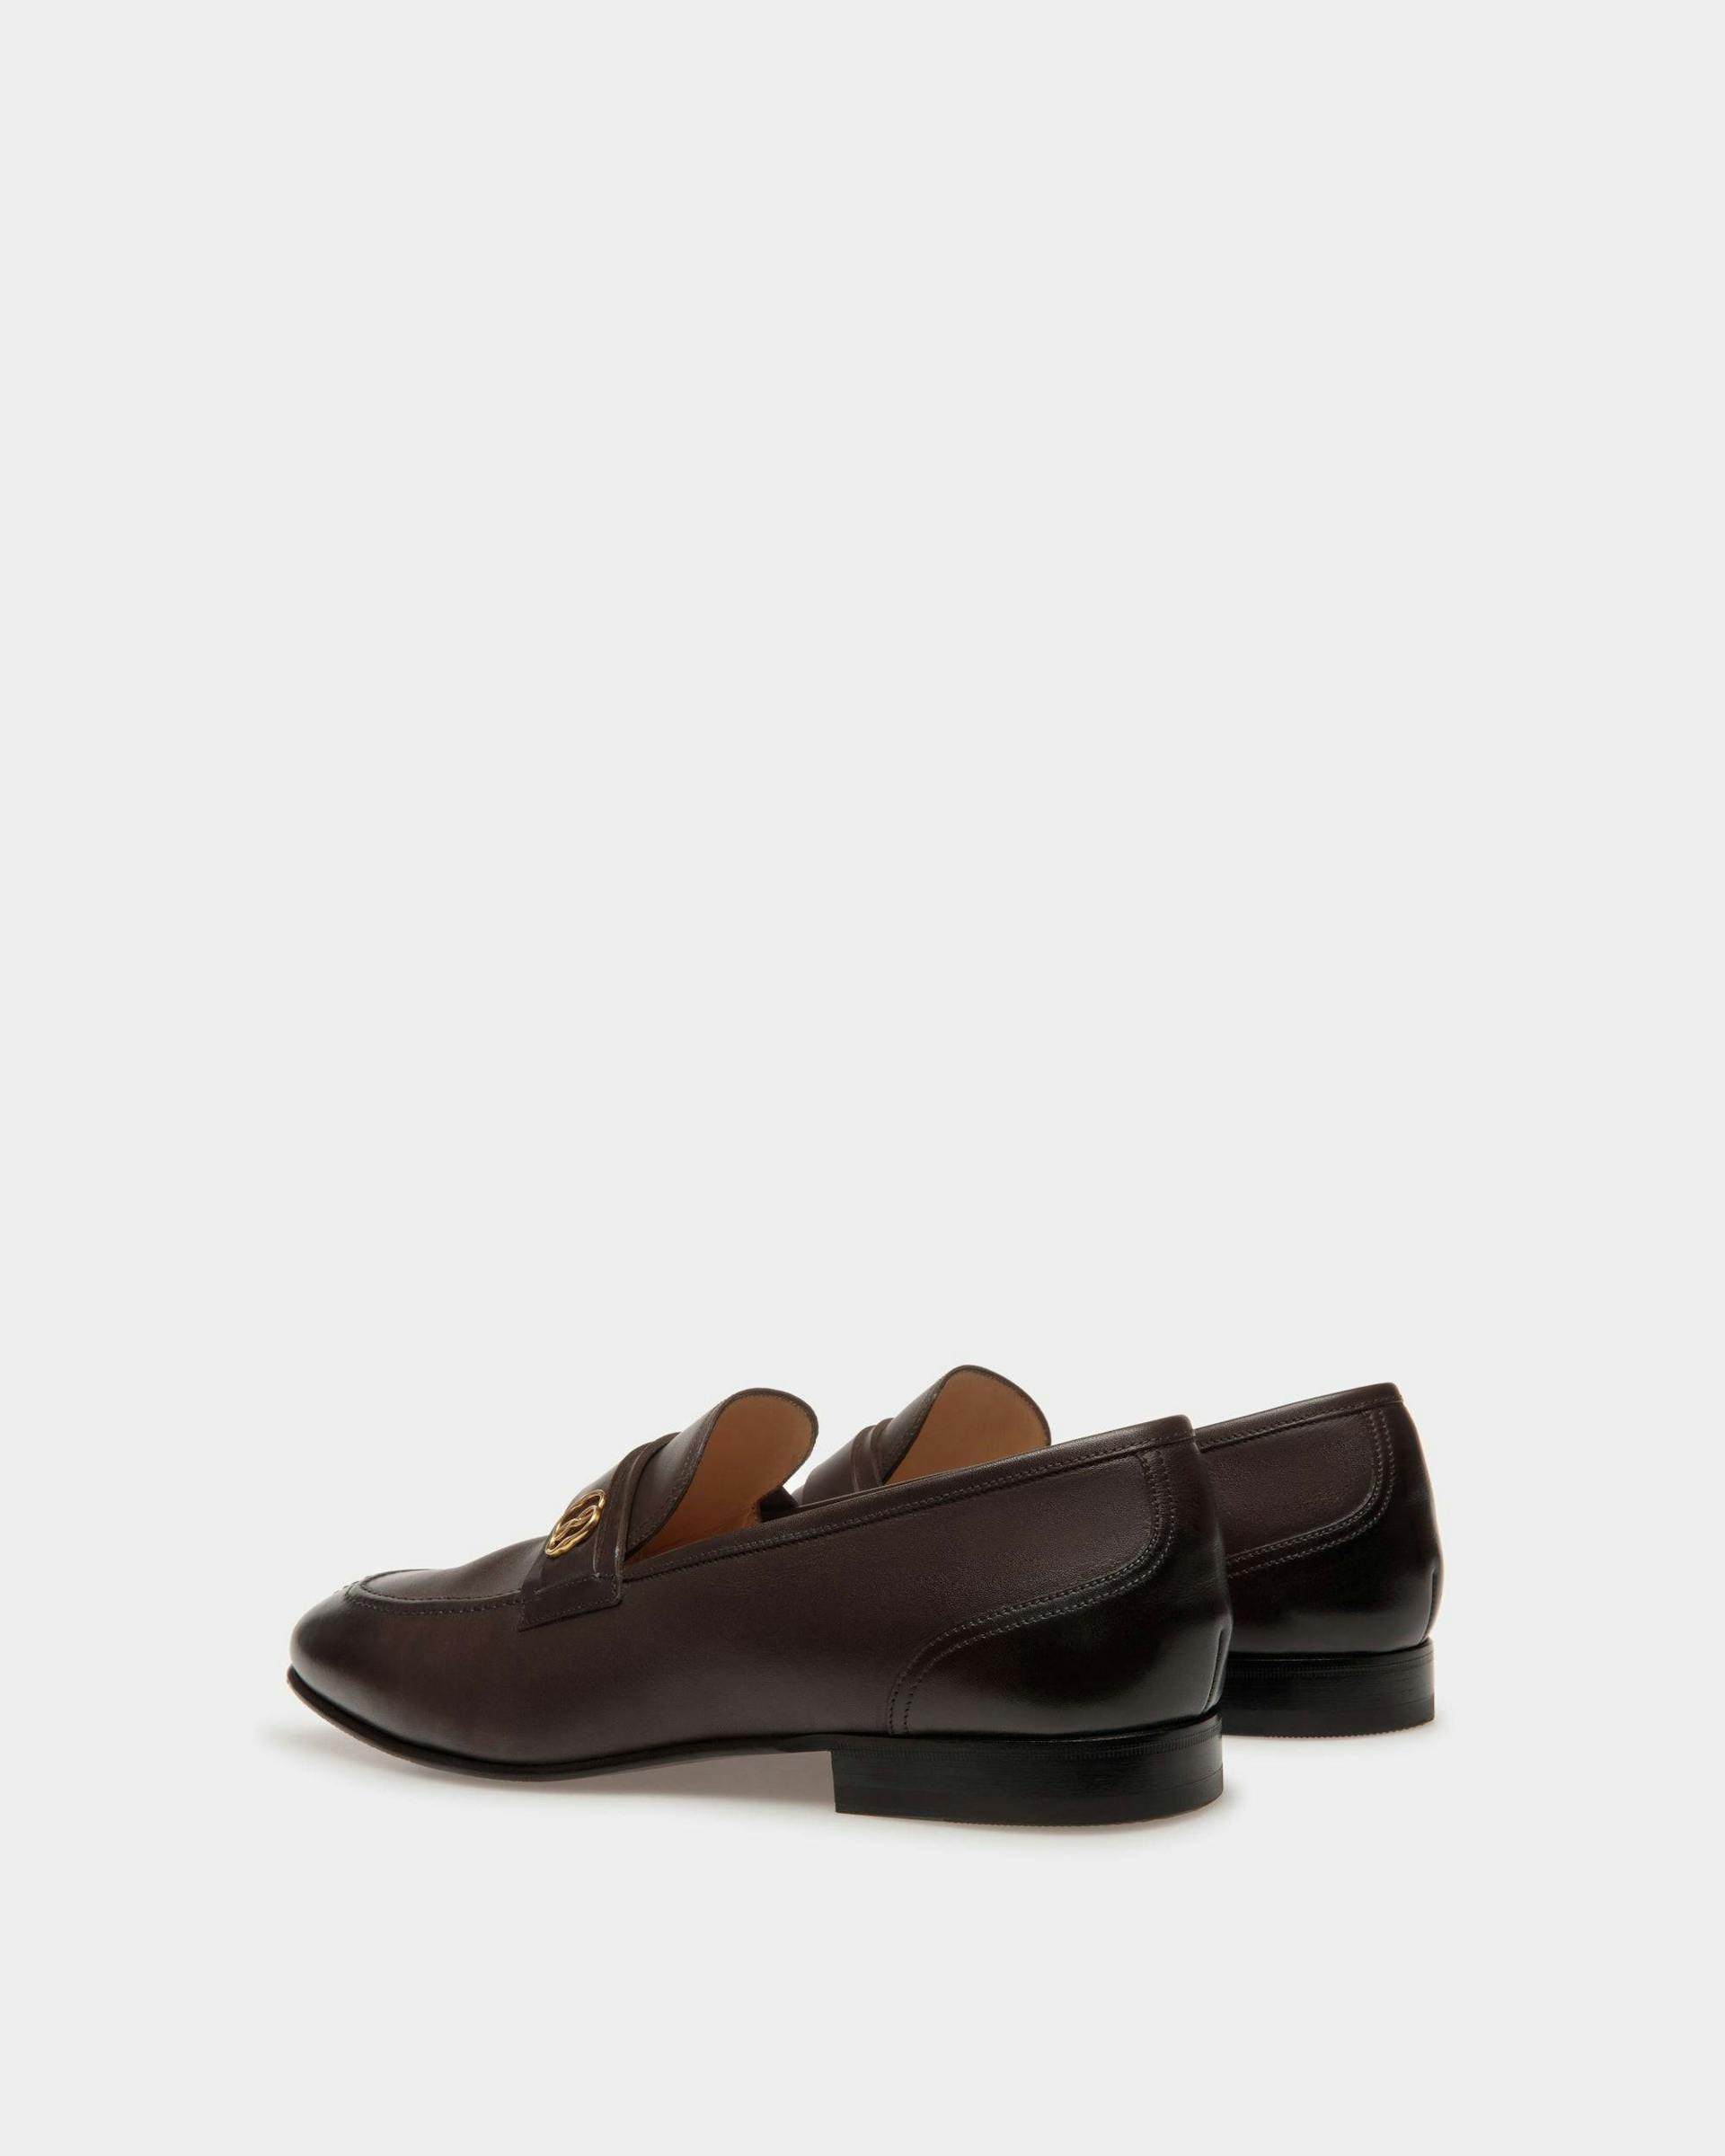 Men's Suisse Loafers In Brown Leather | Bally | Still Life 3/4 Back